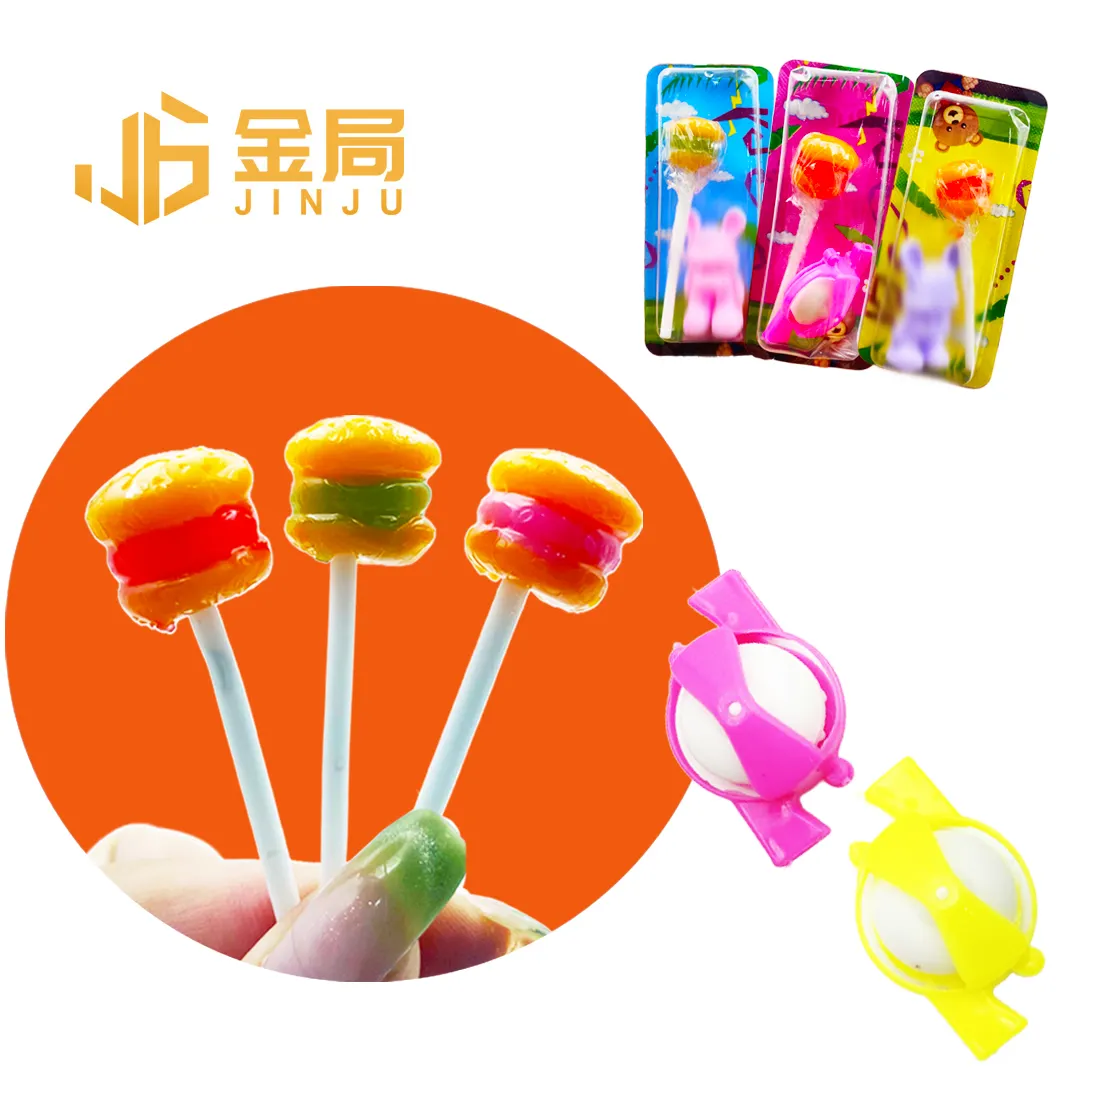 Confectionery Manufacturers Pops Sweet Lollipop Candy Cheap Lollipops Lollypop Candy